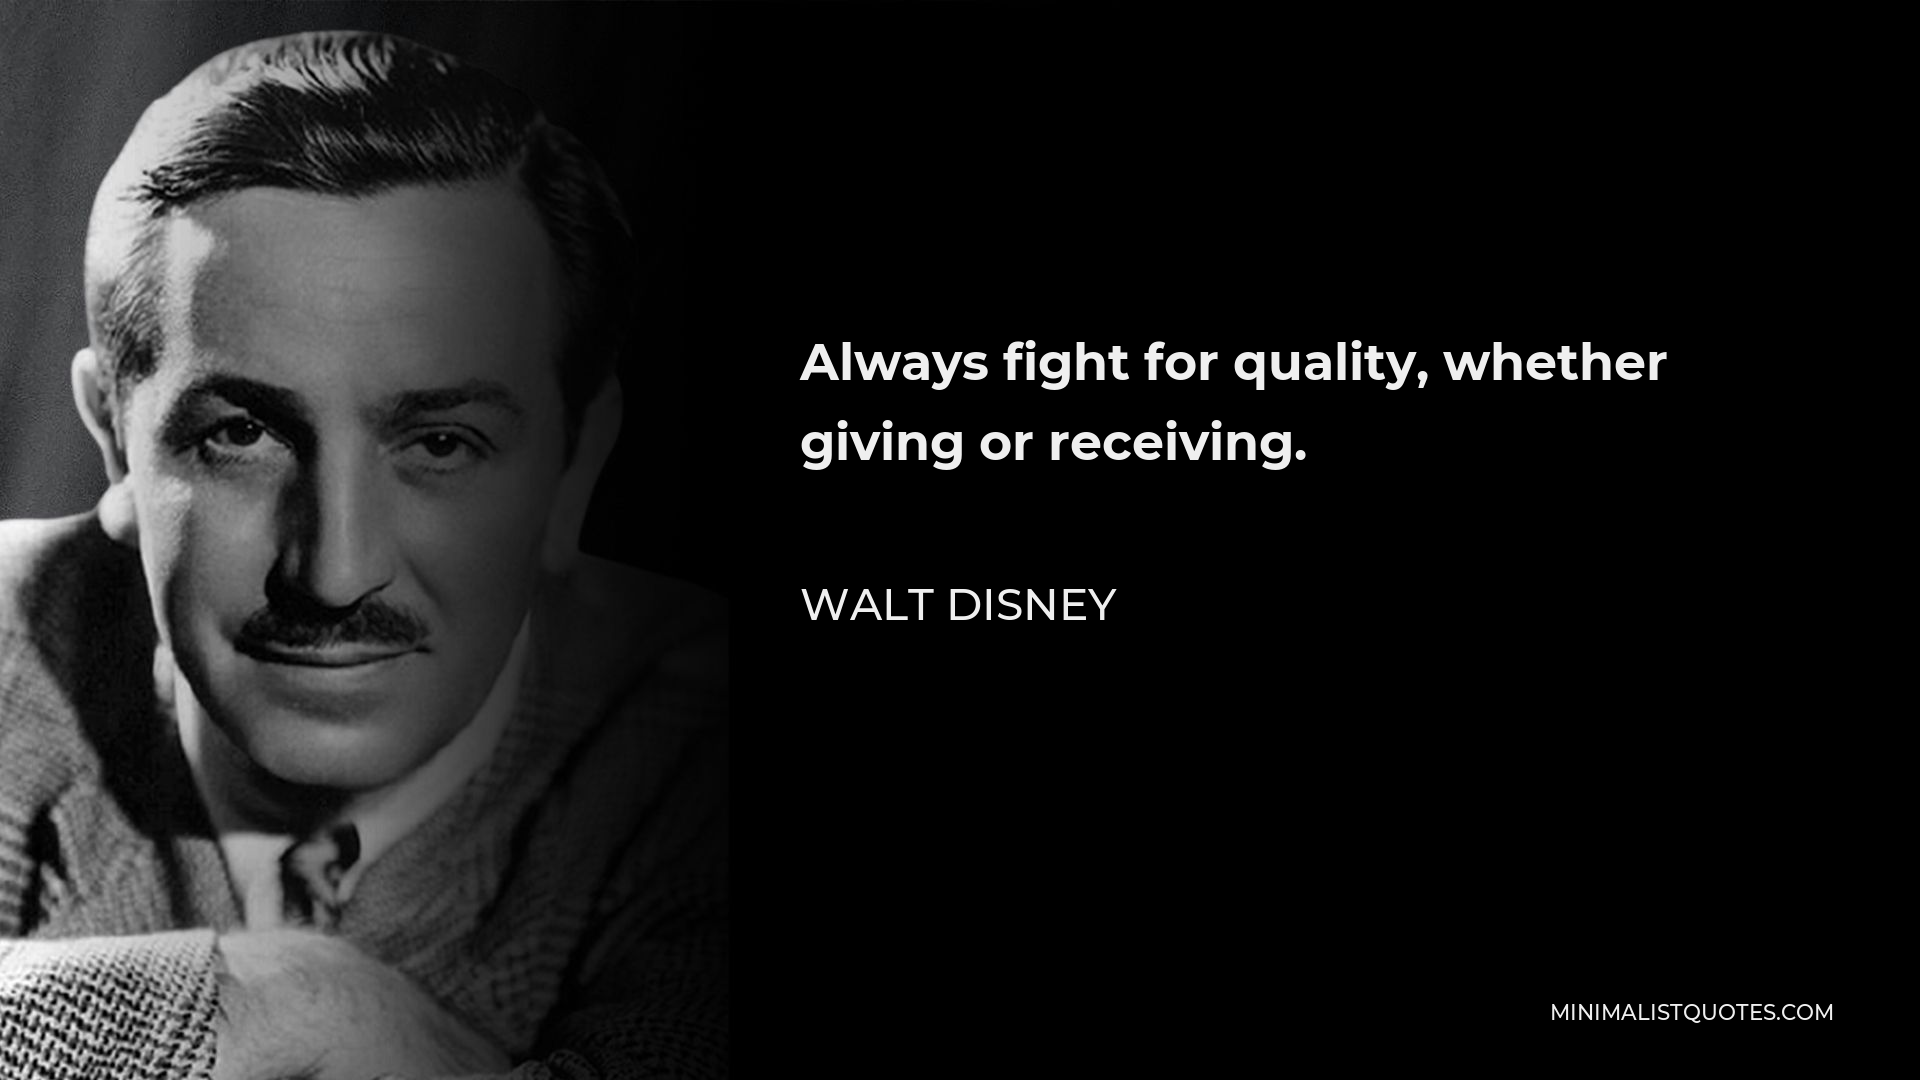 Walt Disney Quote - Always fight for quality, whether giving or receiving.